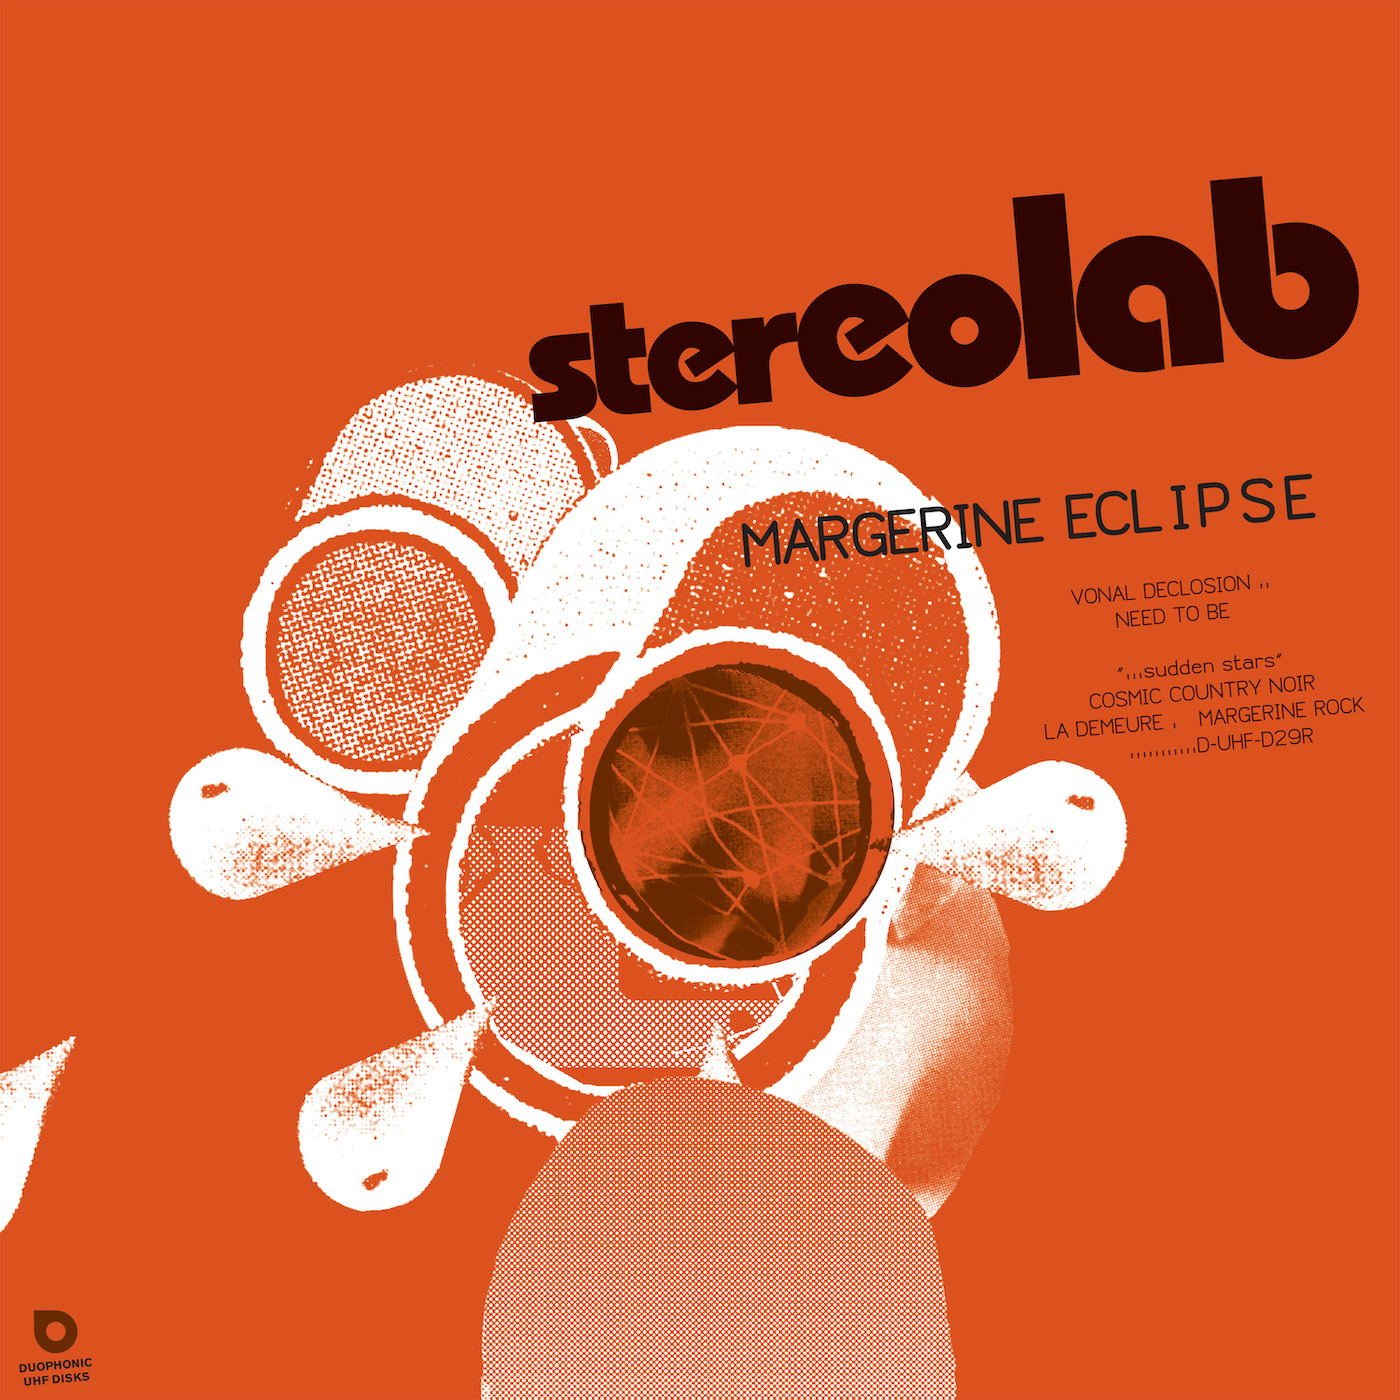 Stereolab – Margerine Eclipse (Expanded Edition) (2003/2019) [FLAC 24bit/96kHz]